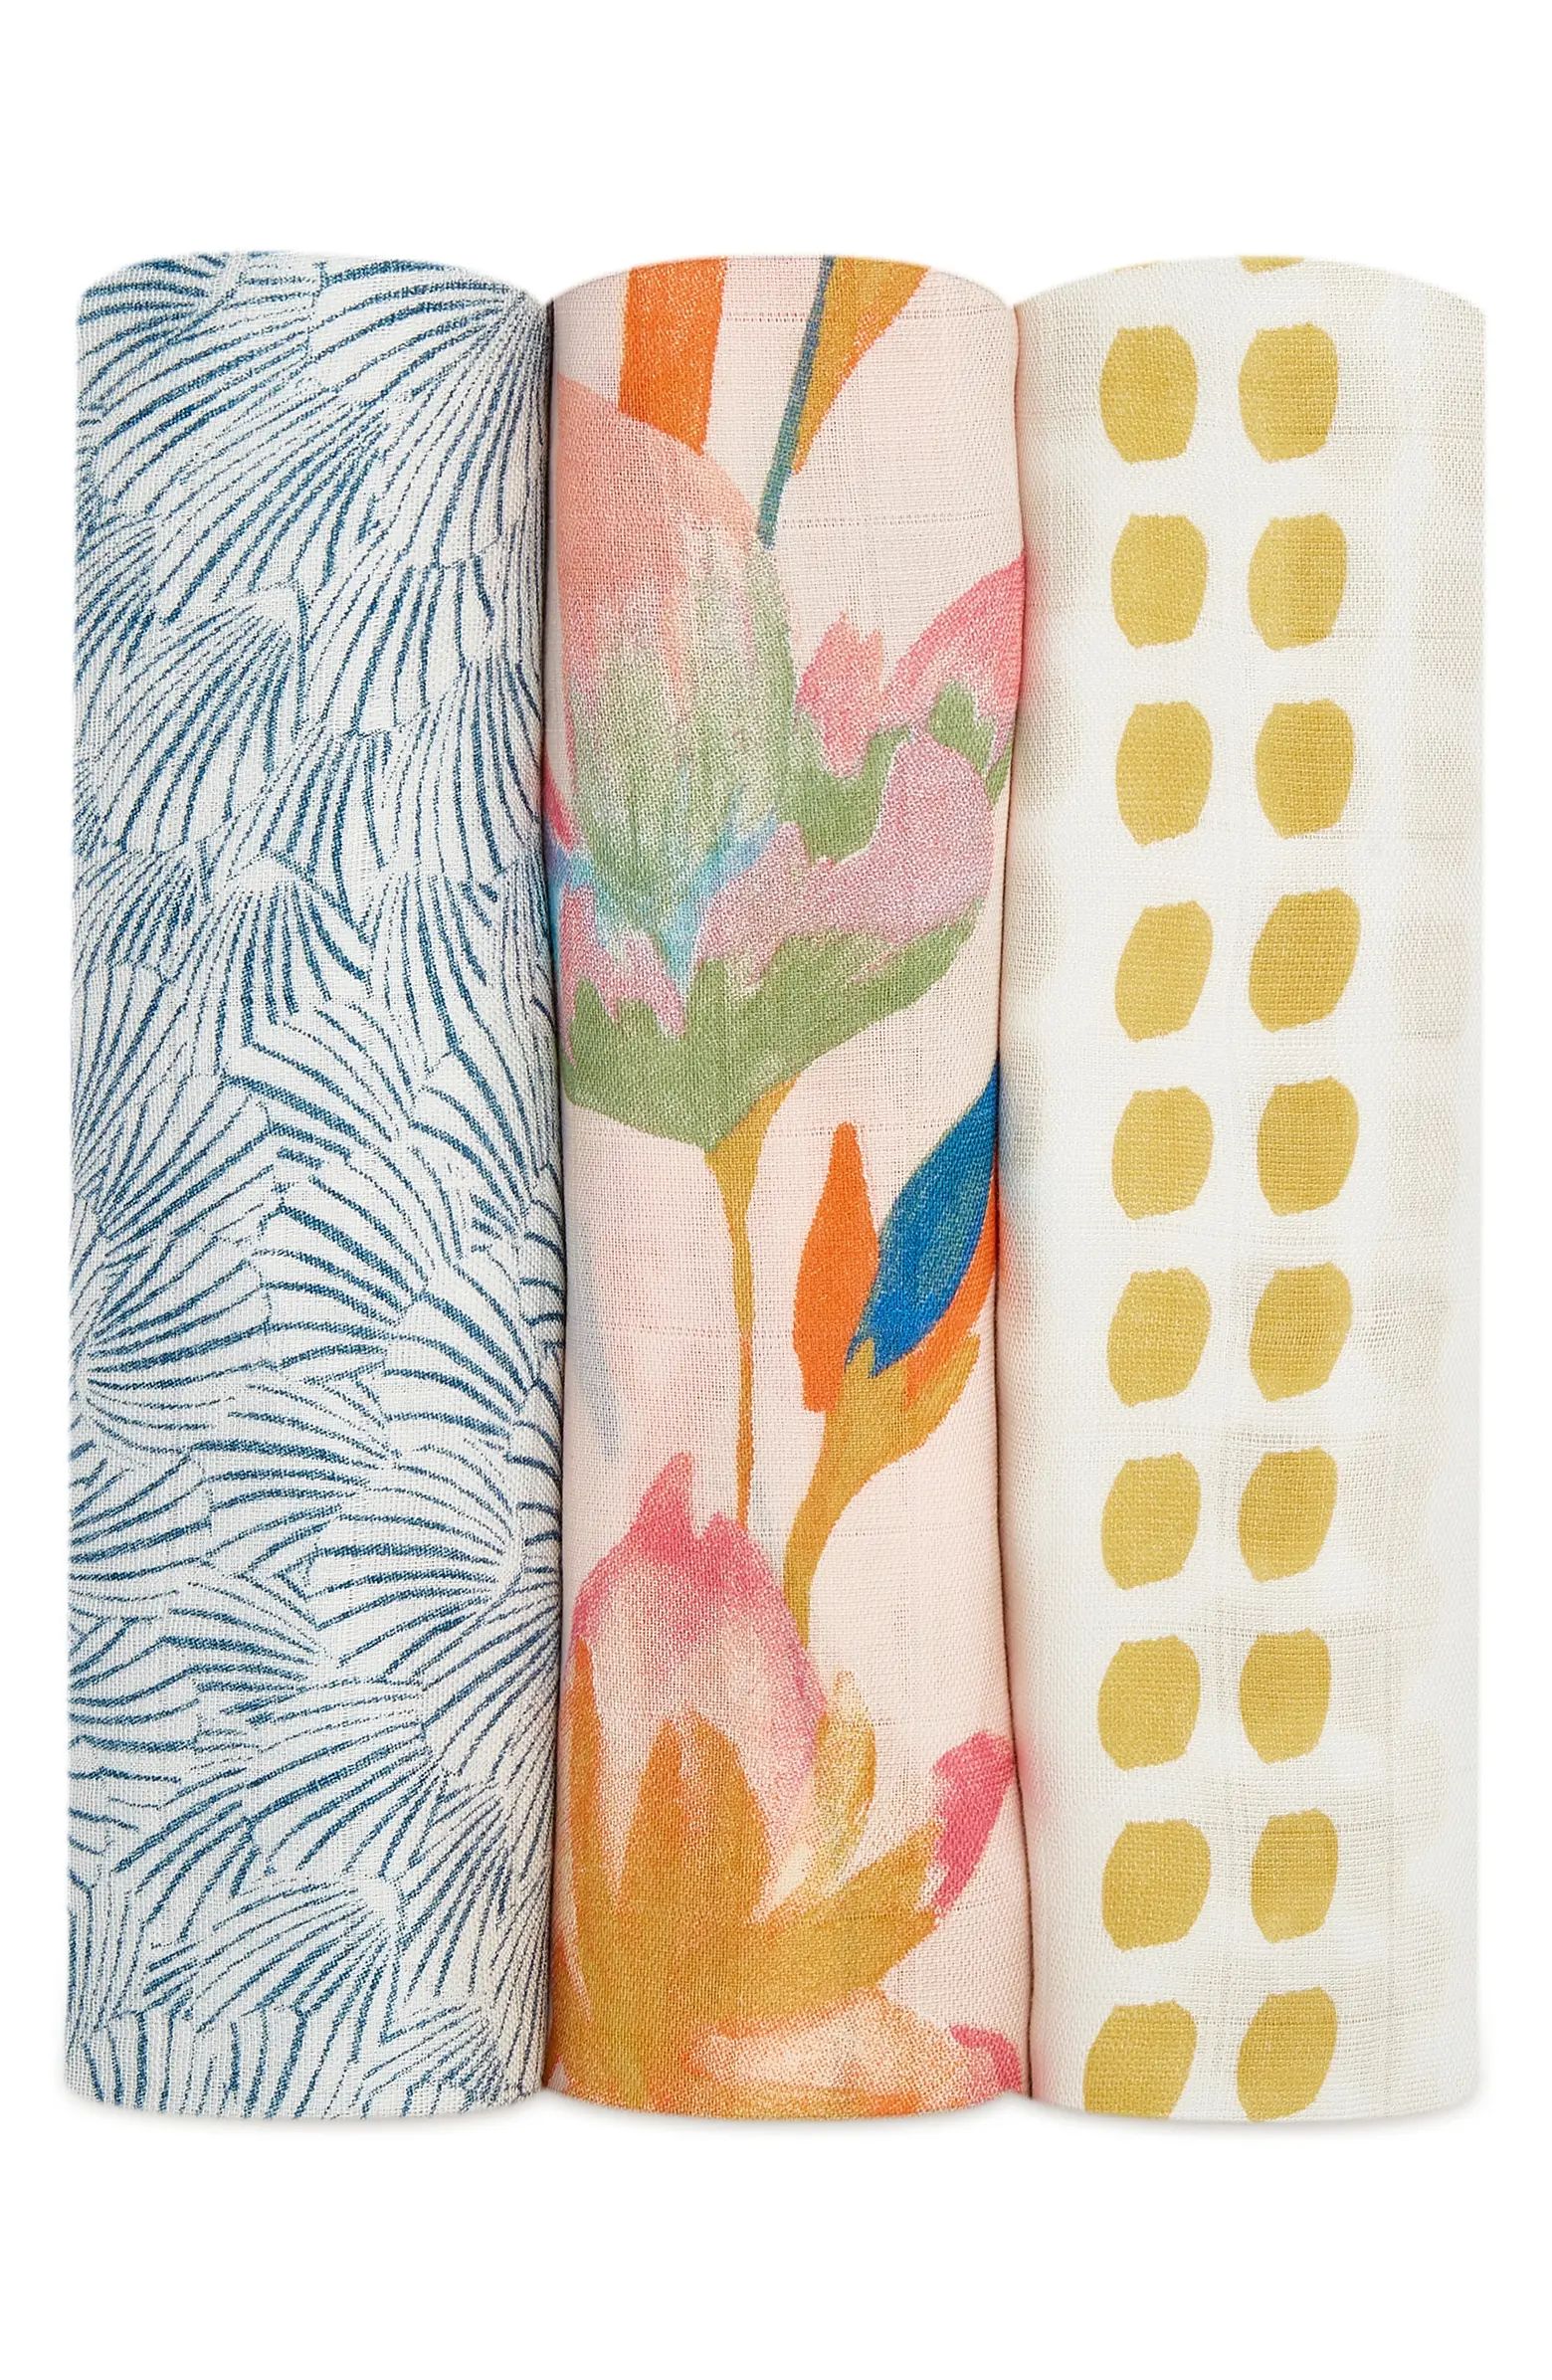 aden + anais 3-Pack Silky Soft Swaddling Cloths | Nordstrom | Nordstrom